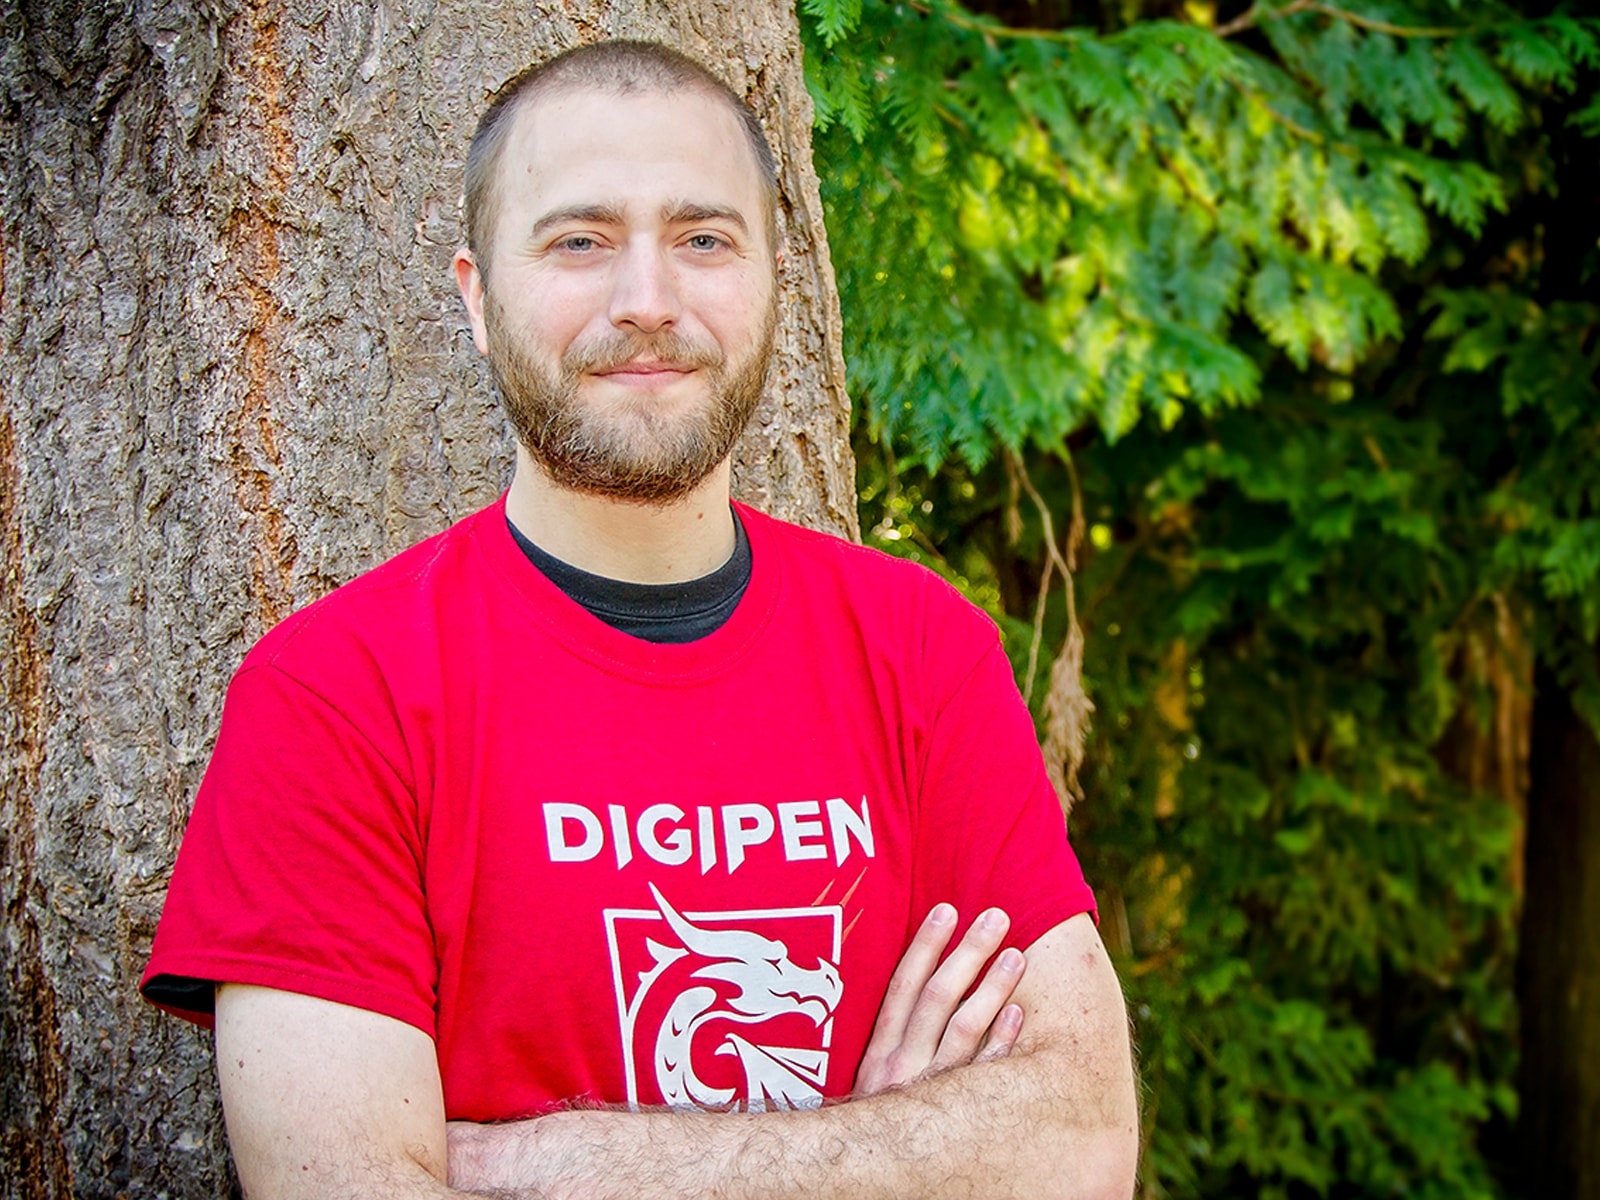 DigiPen student Casey Donelson leaning against a tree on the DigiPen campus with his arms crossed